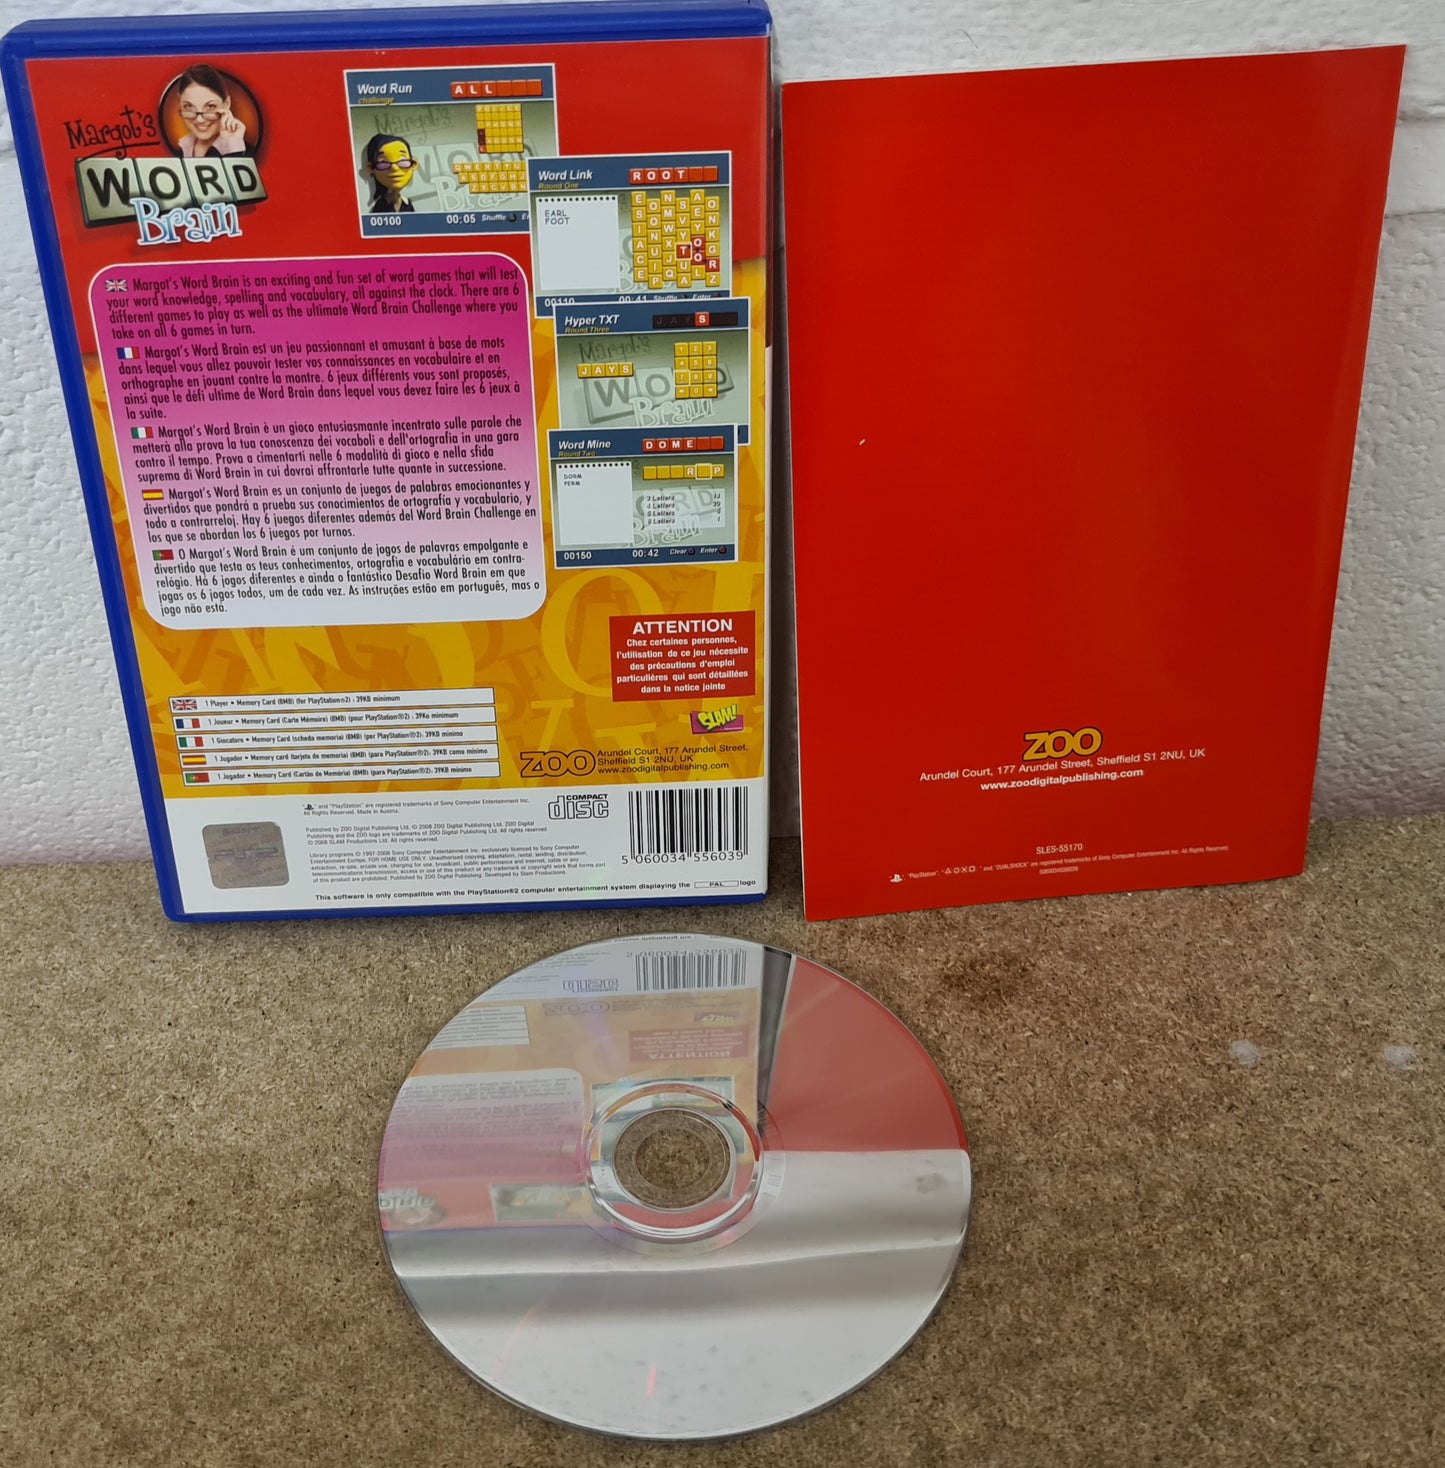 Margot's Word Brain Sony Playstation 2 (PS2) Game